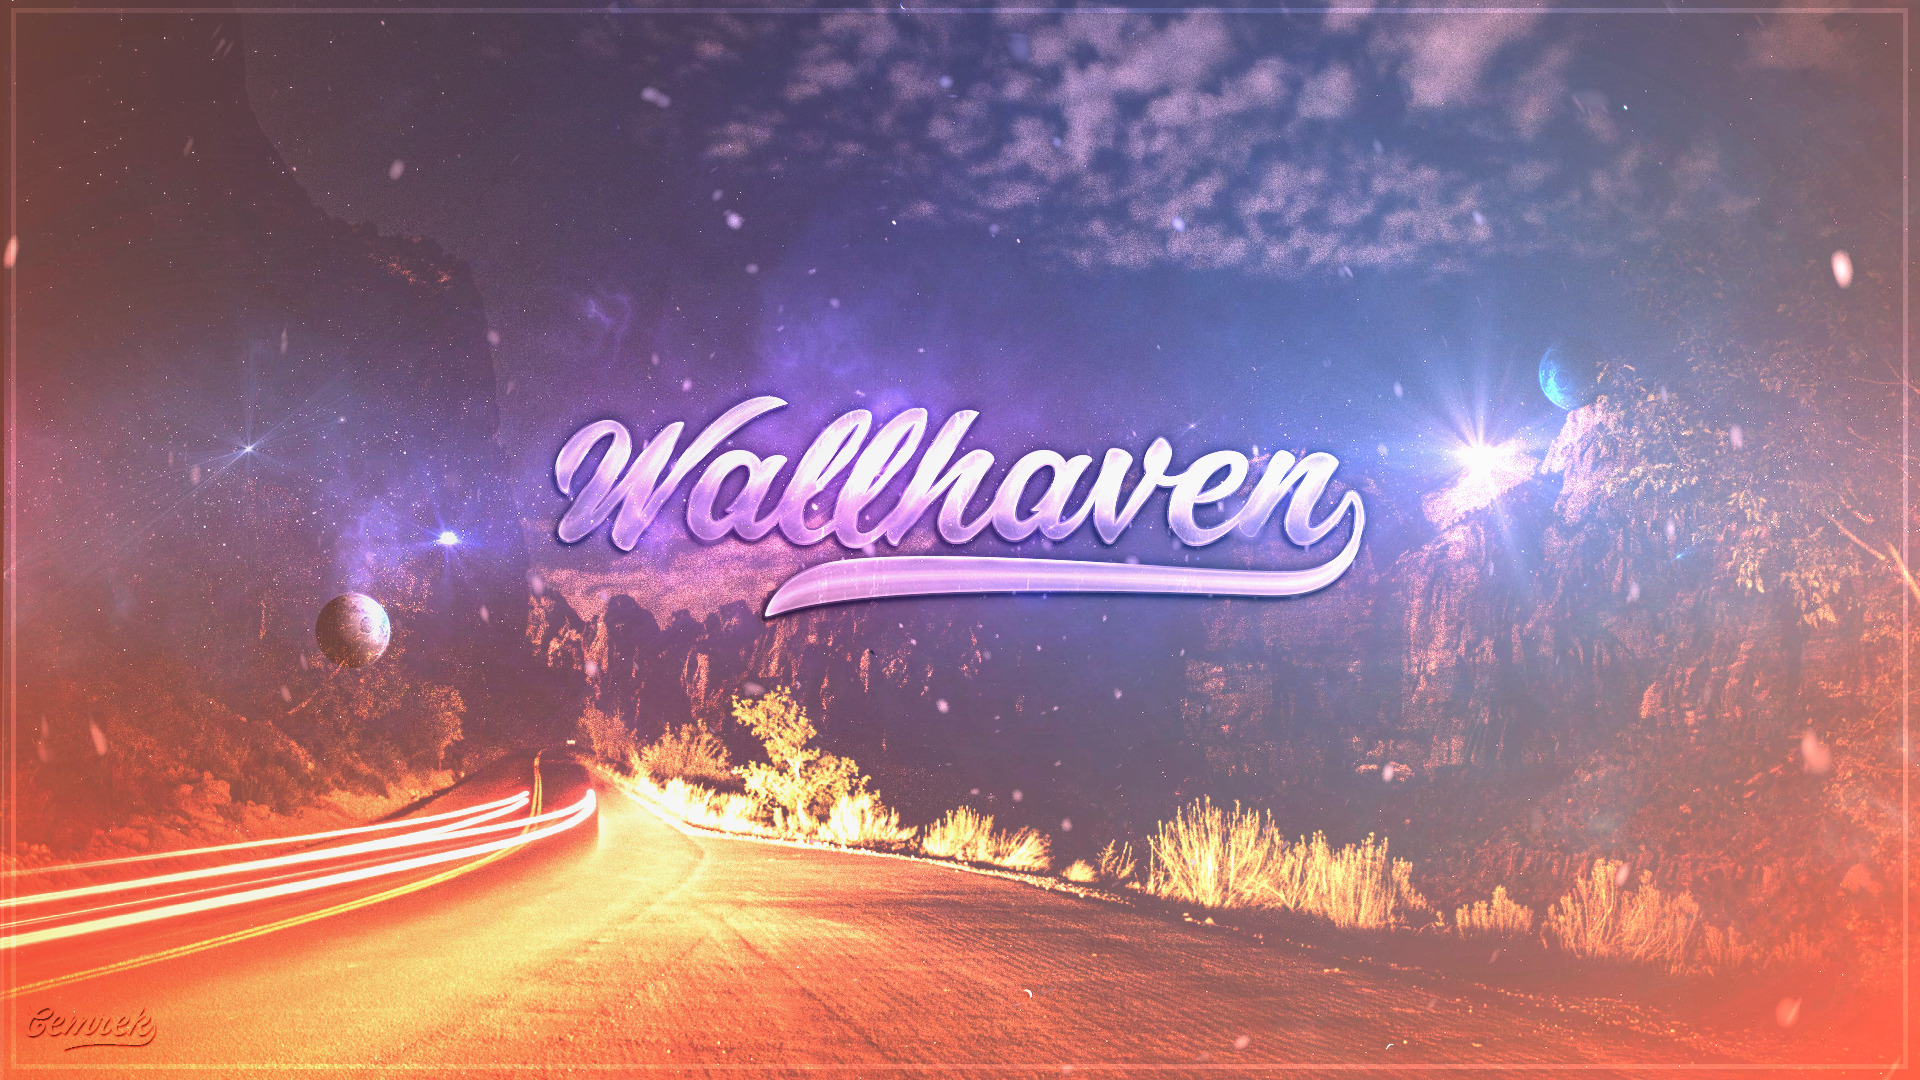 wallhaven, Metalanguage, Abstract, Space, Road, Flares Wallpaper